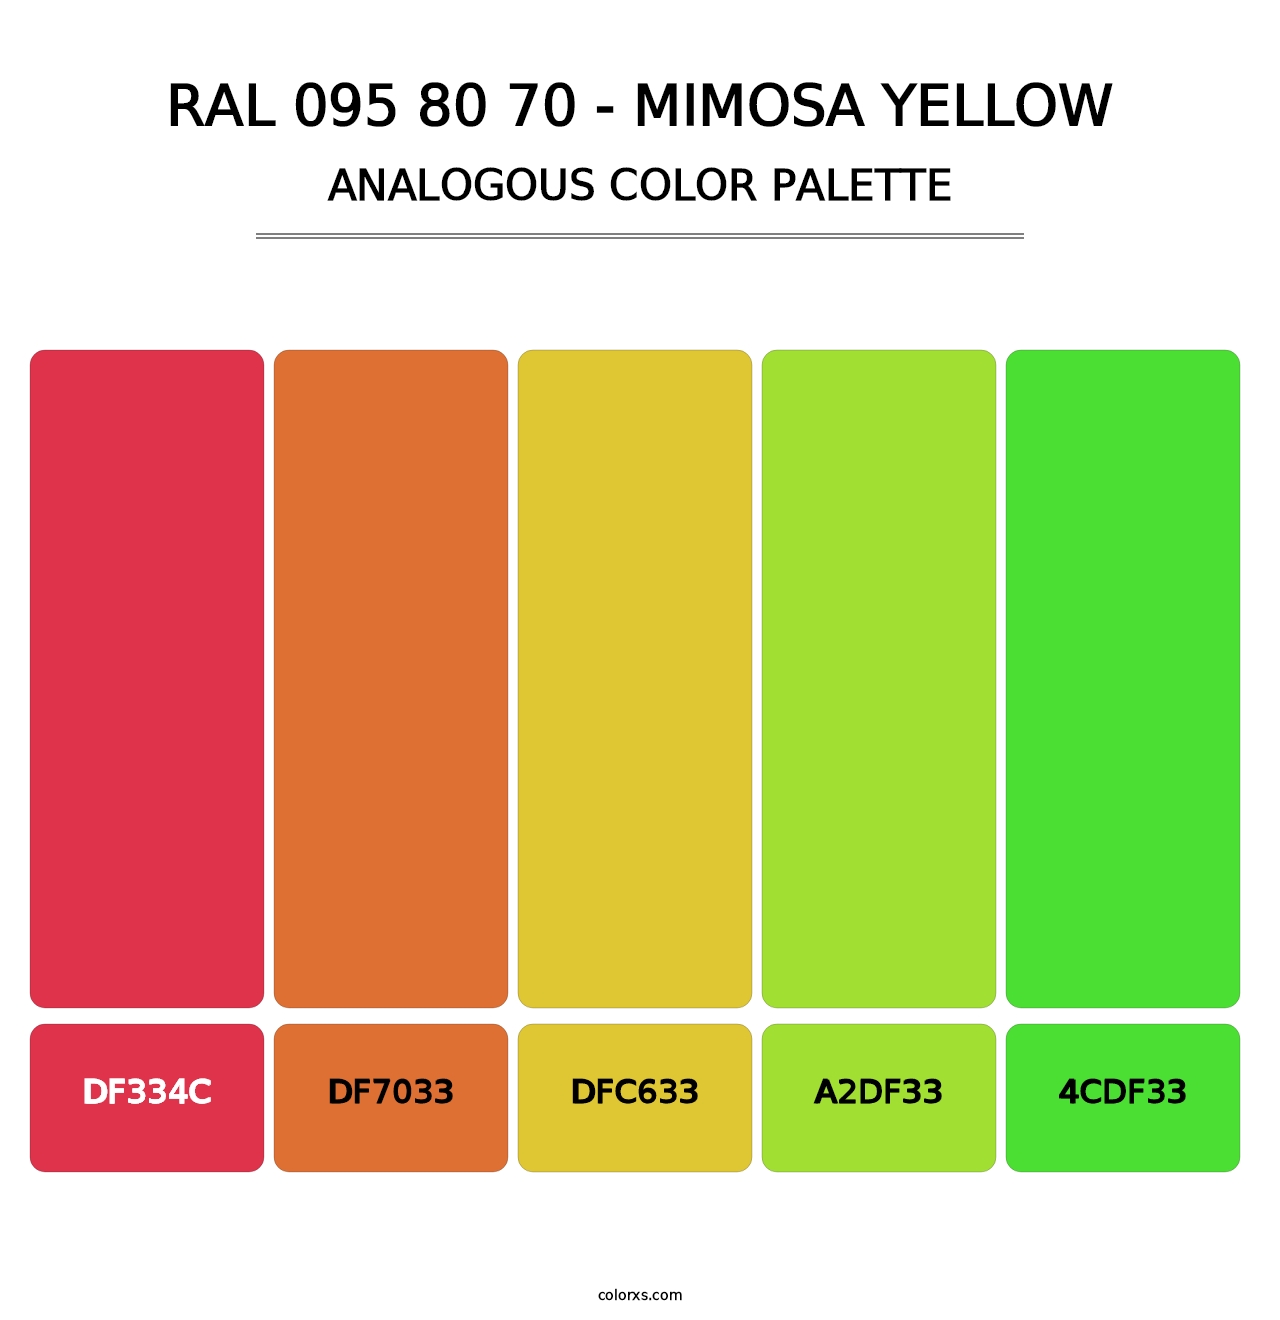 RAL 095 80 70 - Mimosa Yellow - Analogous Color Palette